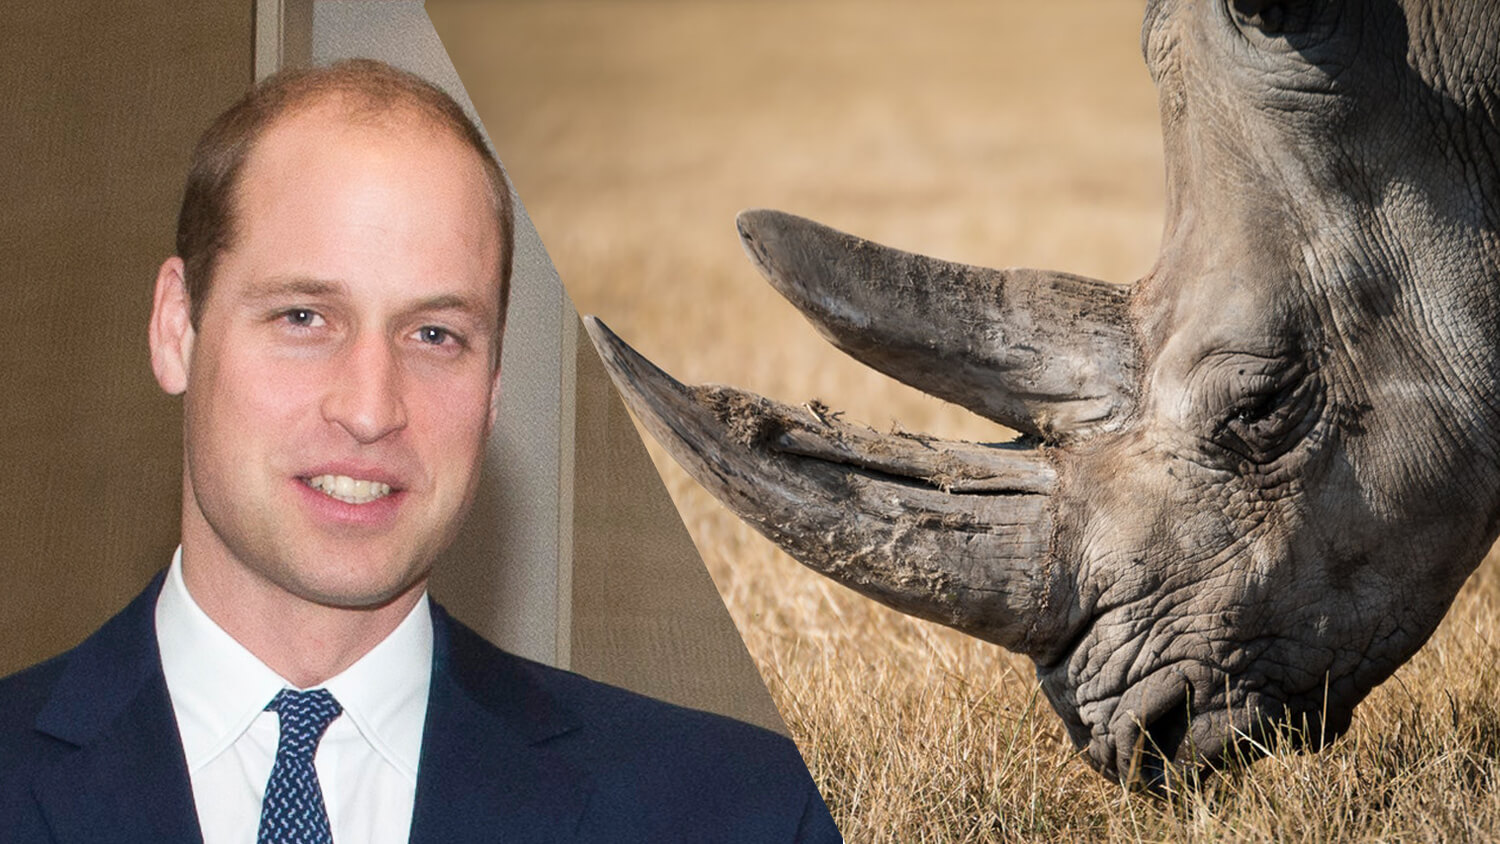 30 Financial Institutions Back Prince William’s in Combating Illegal Wildlife Trade